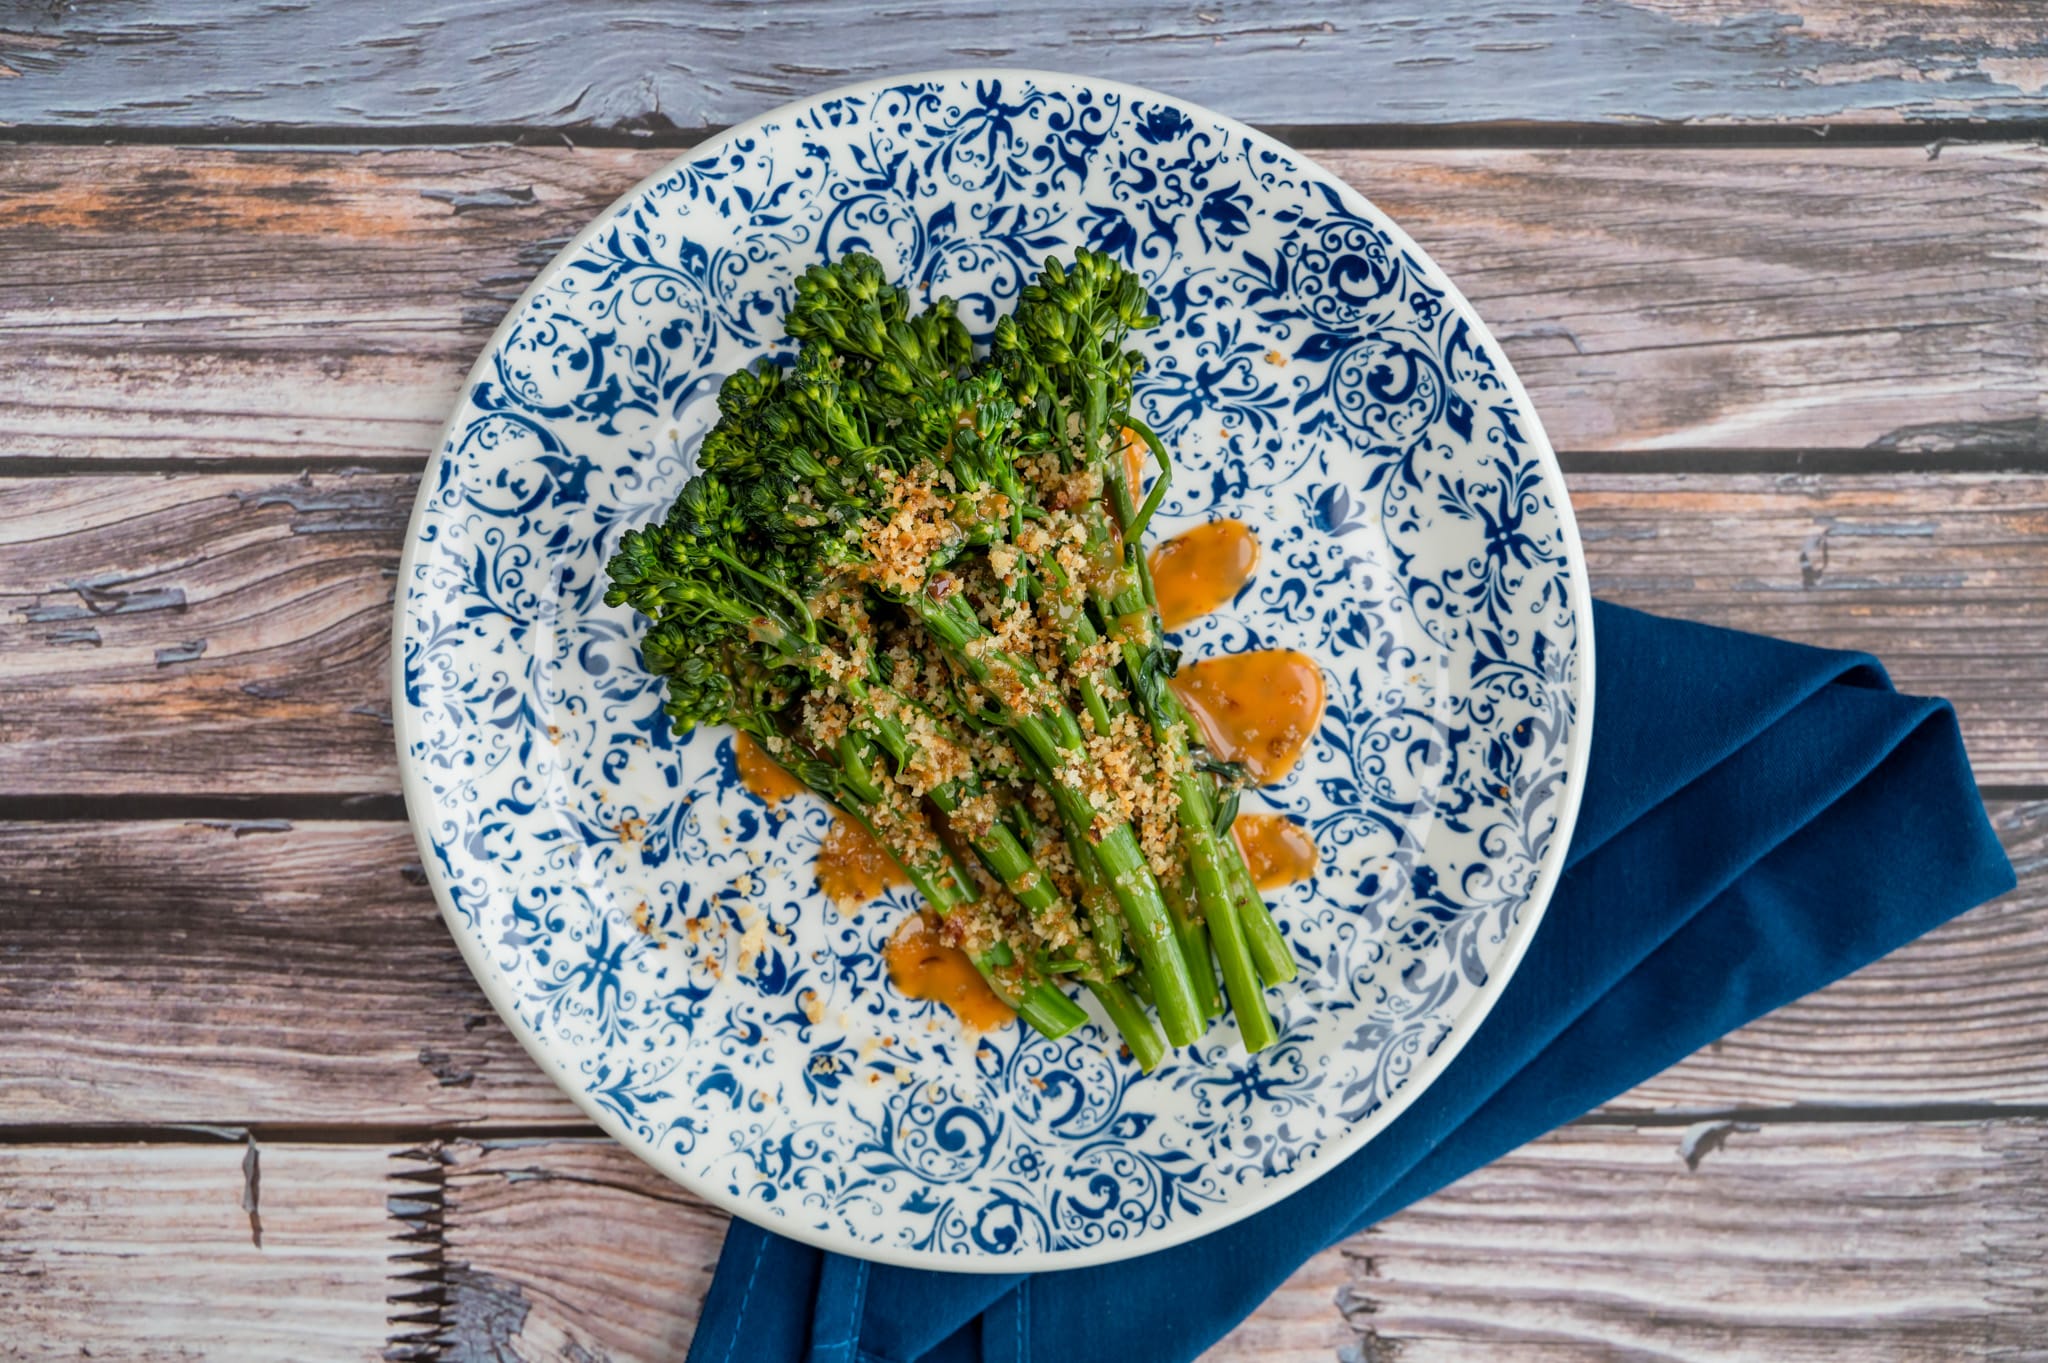 Broccolini with toasted breadcrumbs and chipotle aioli